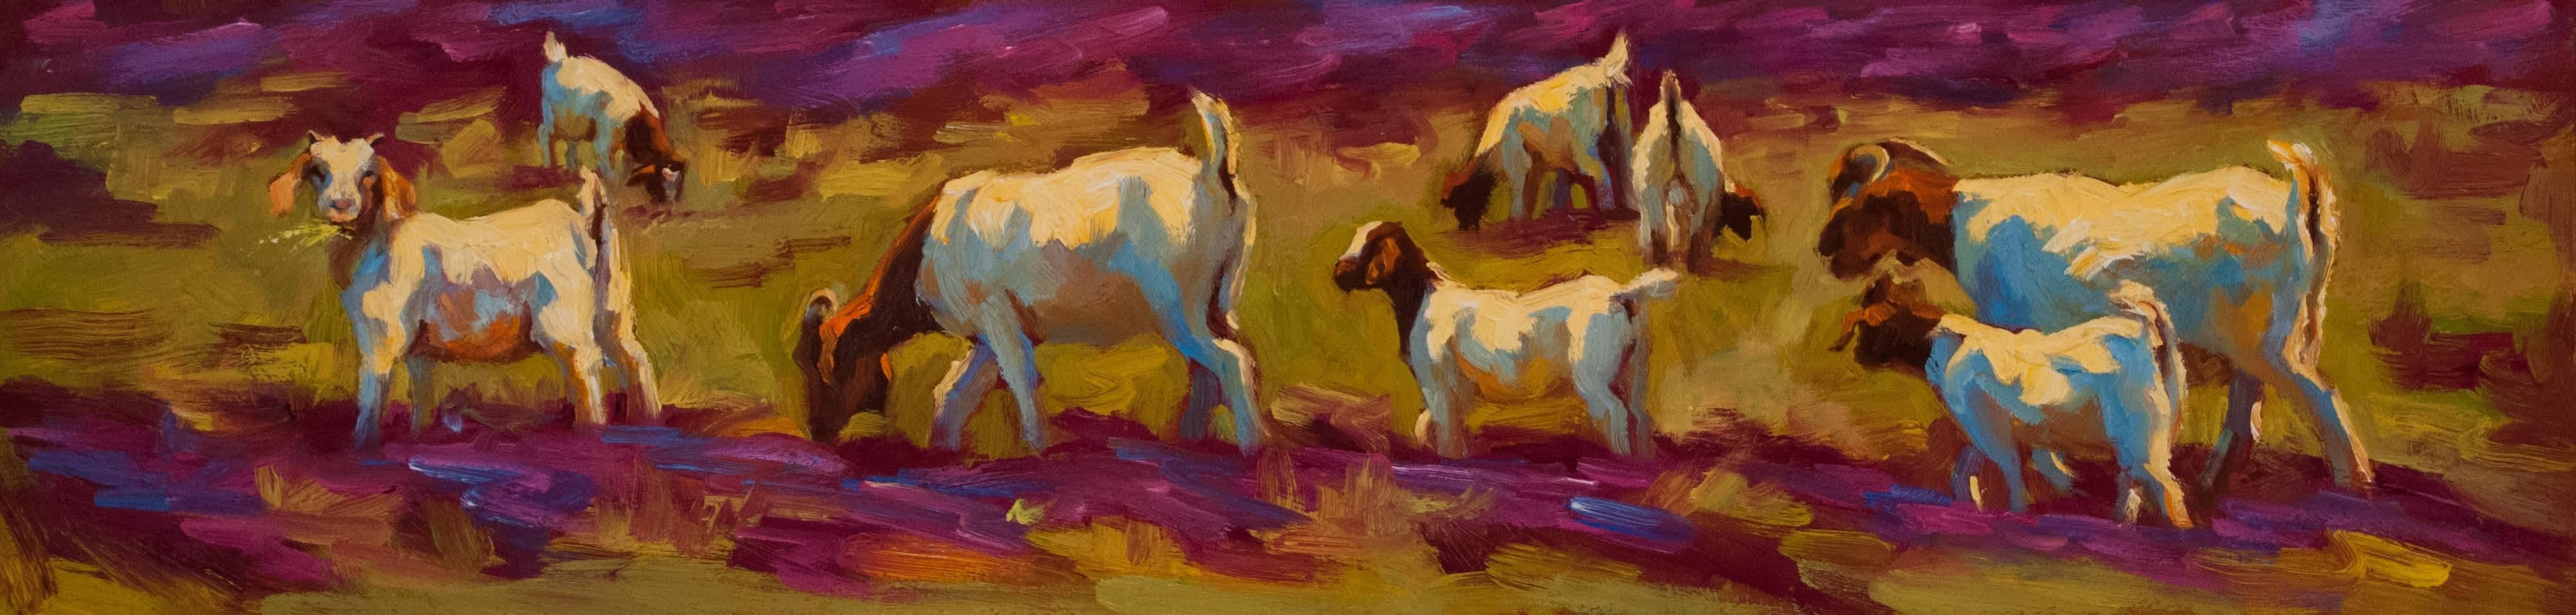 Cheri Christensen Animal Painting - "Browsing in Verbena Fields" Cute Goats in Bright Purple and Green Grass